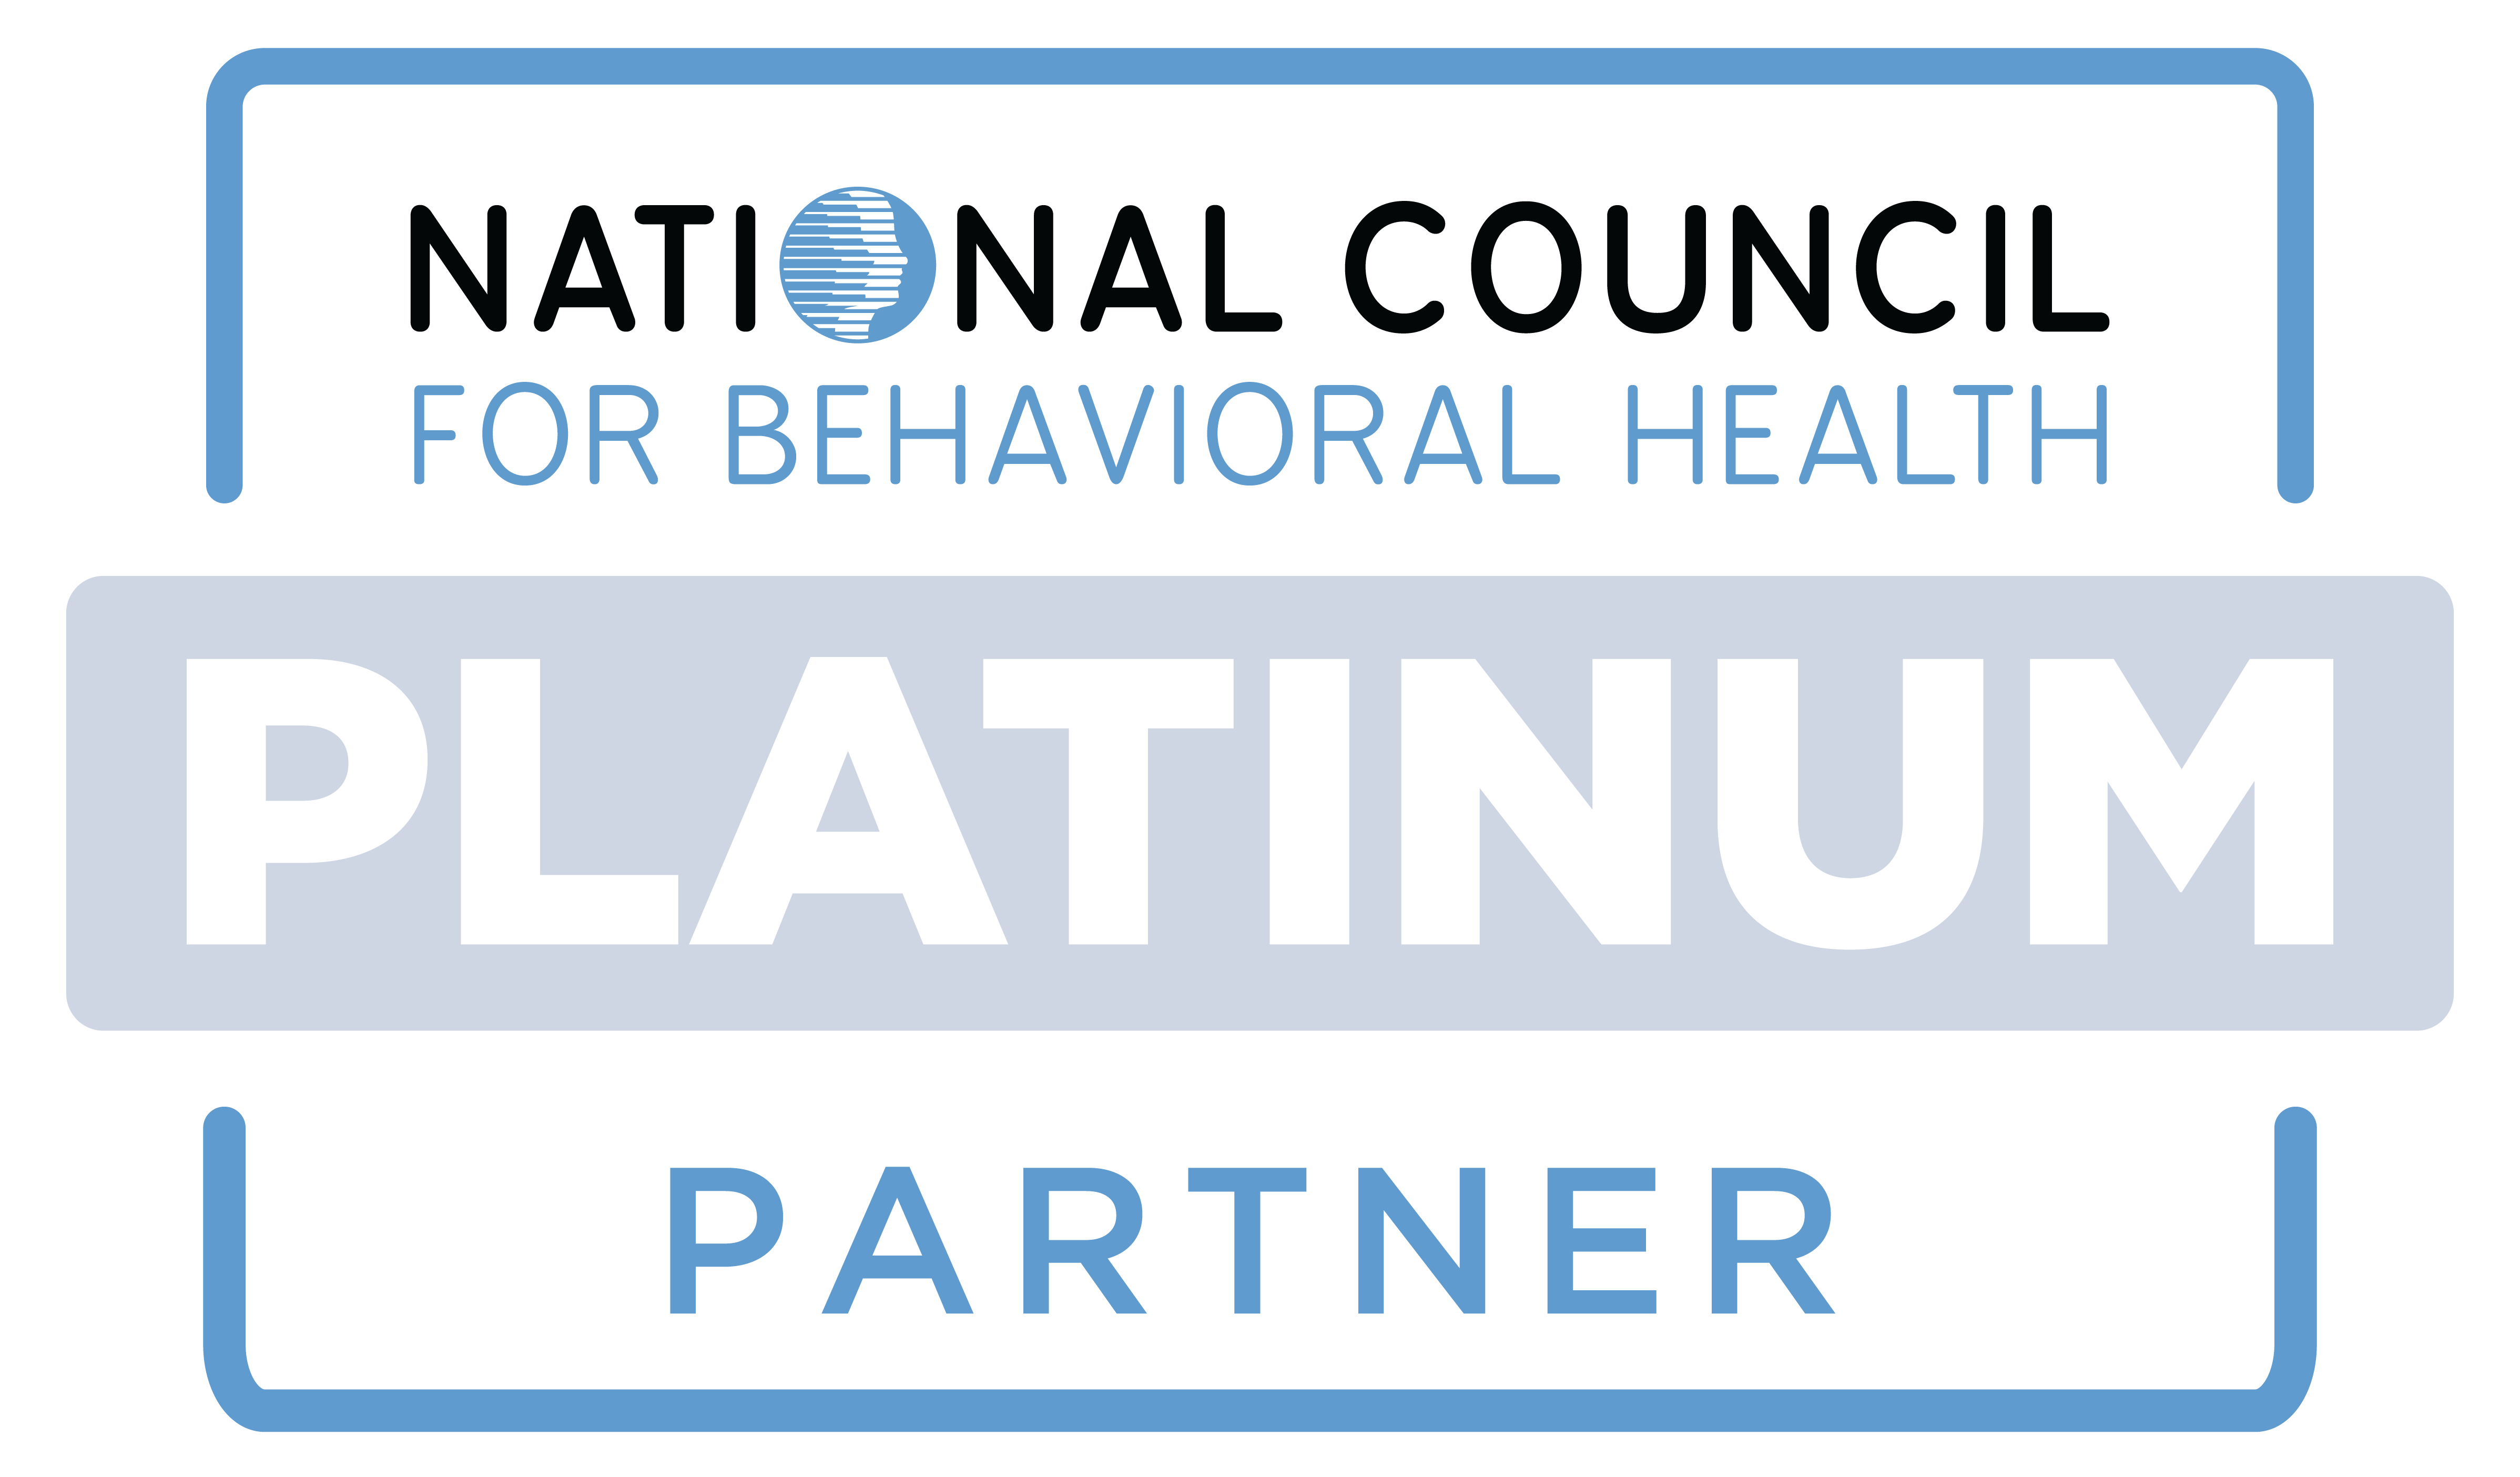 DATIS HR Cloud Named the Official HR and Payroll Platinum Partner of the National Council for Behavioral Health